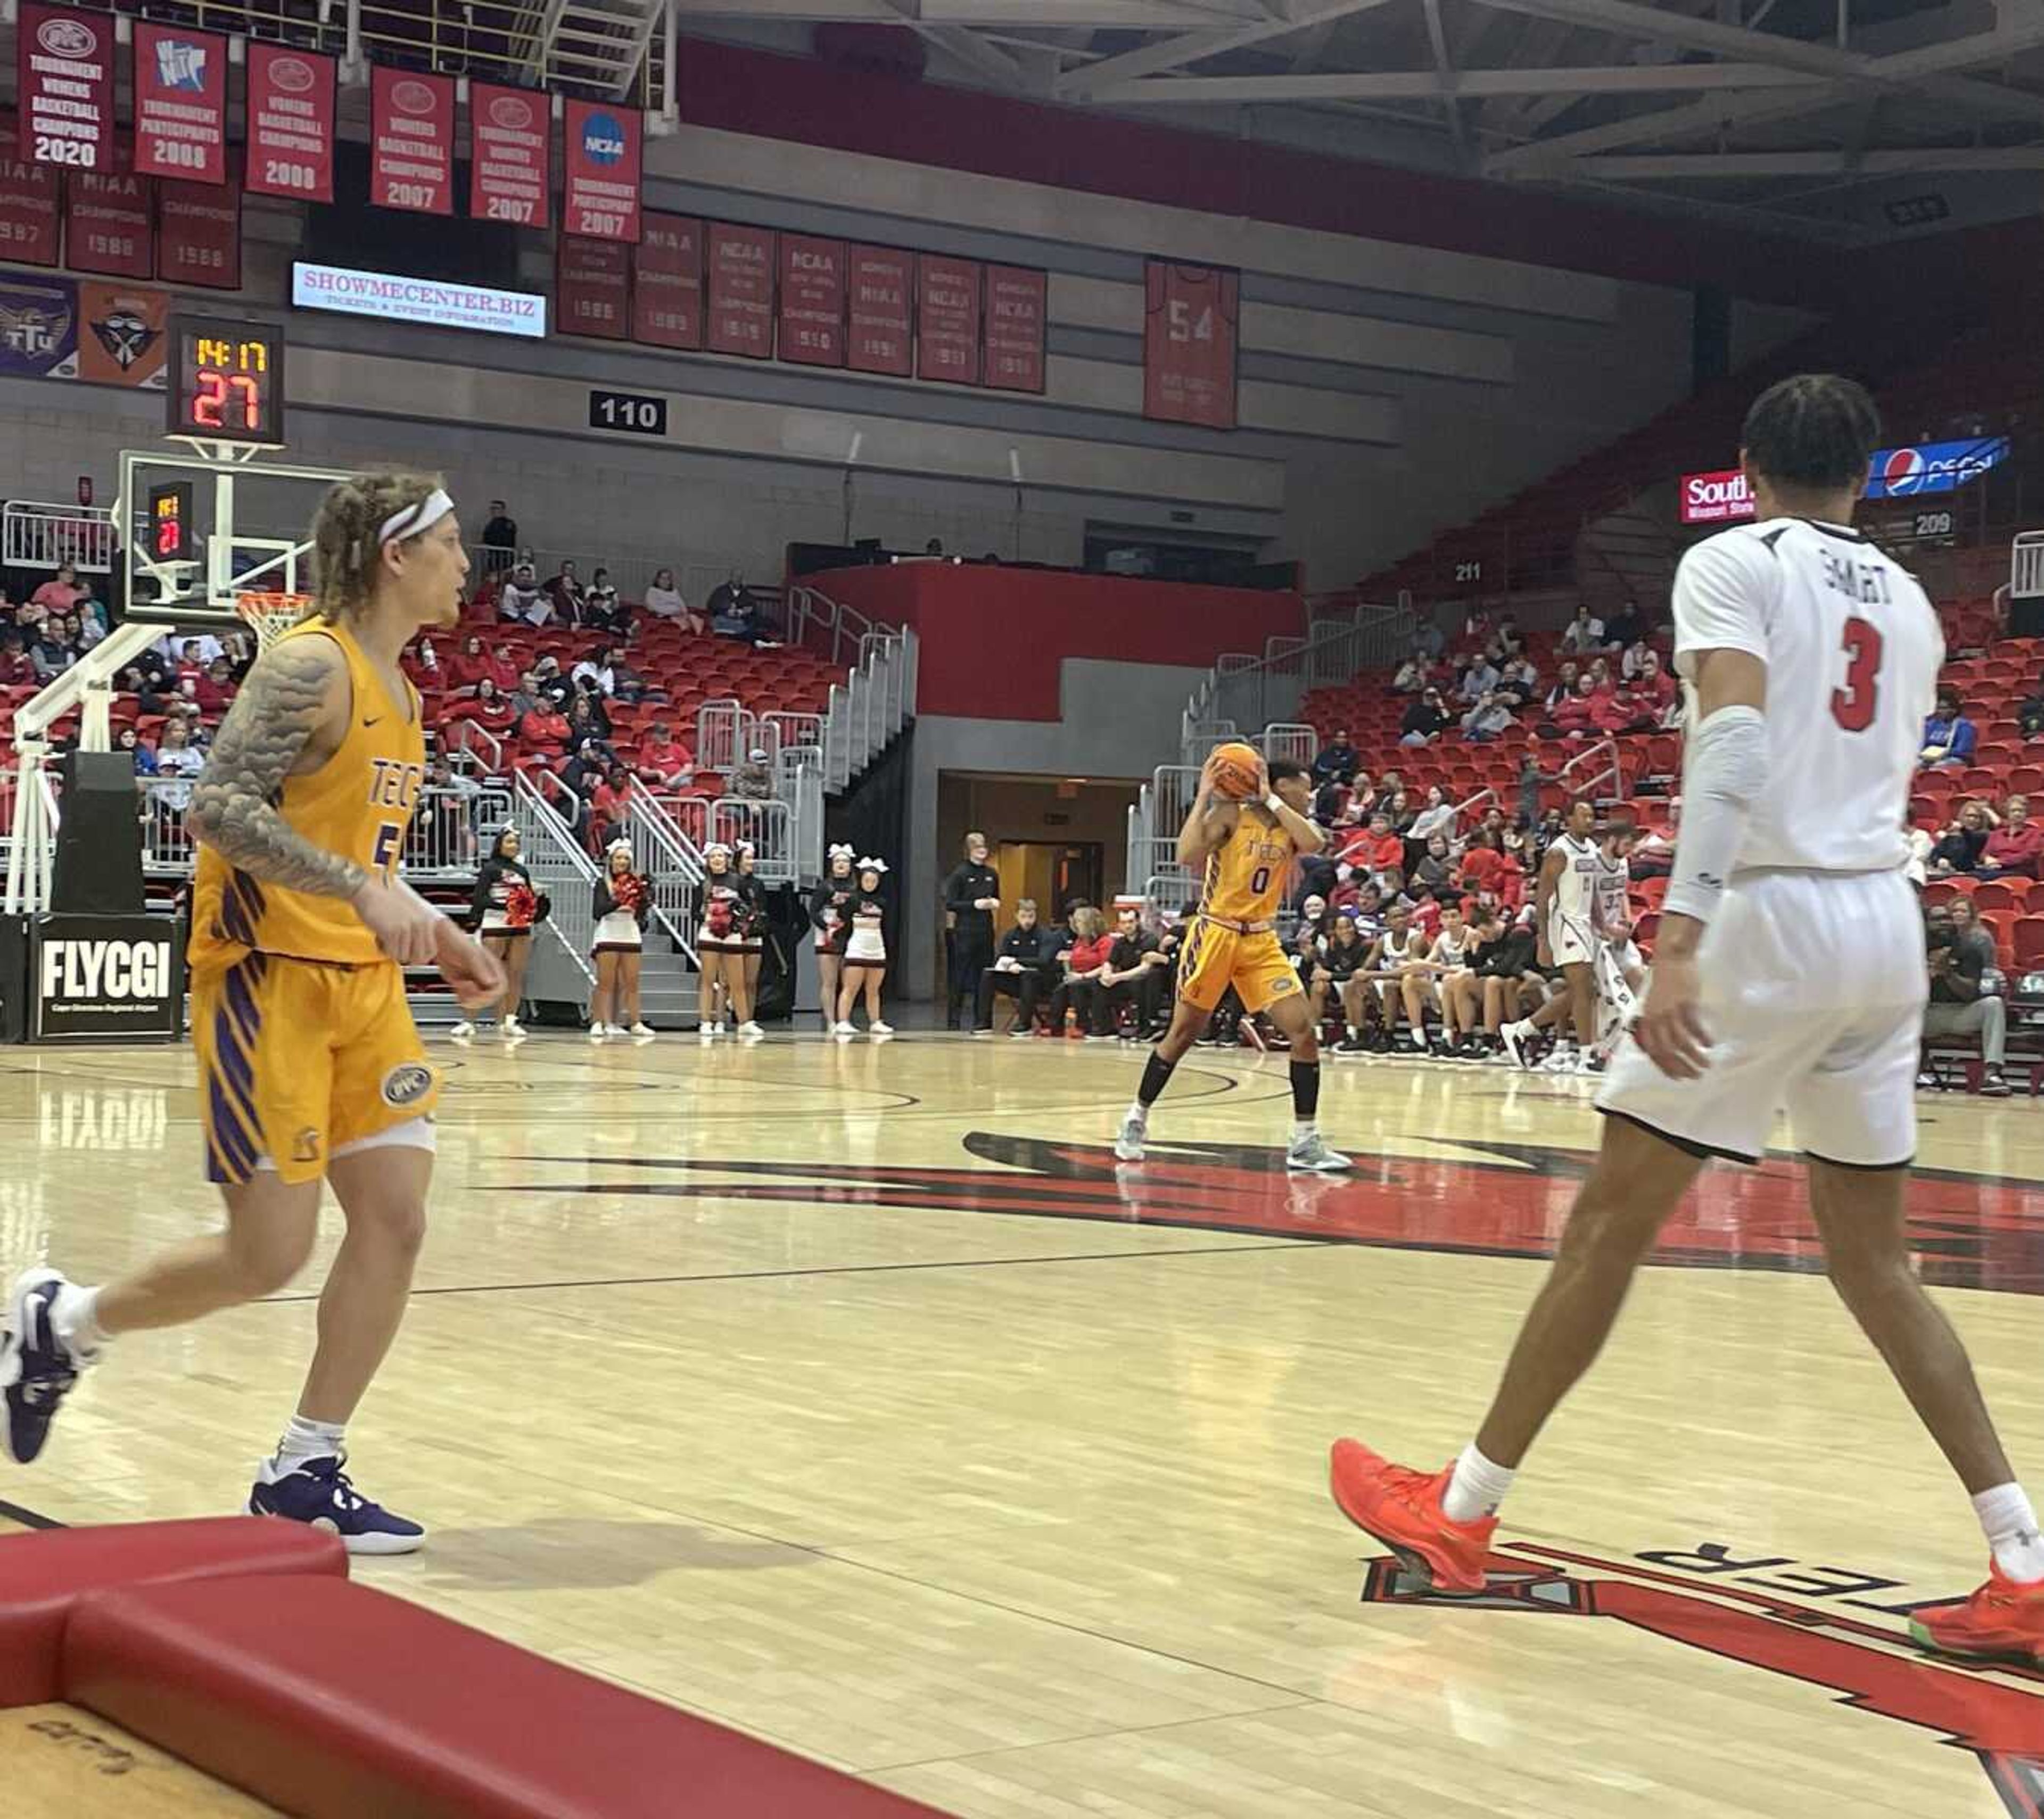 SEMO sophomore guard Aquan Smart (3) gets ready to defend Tennessee Tech junior guard Brett Thompson (5) while Tennessee Tech senior guard Ty Perry (0) brings the ball up the court during SEMO’s 84-77 over Tennessee Tech in double overtime on Saturday, Jan. 21 at the Show-Me Center.